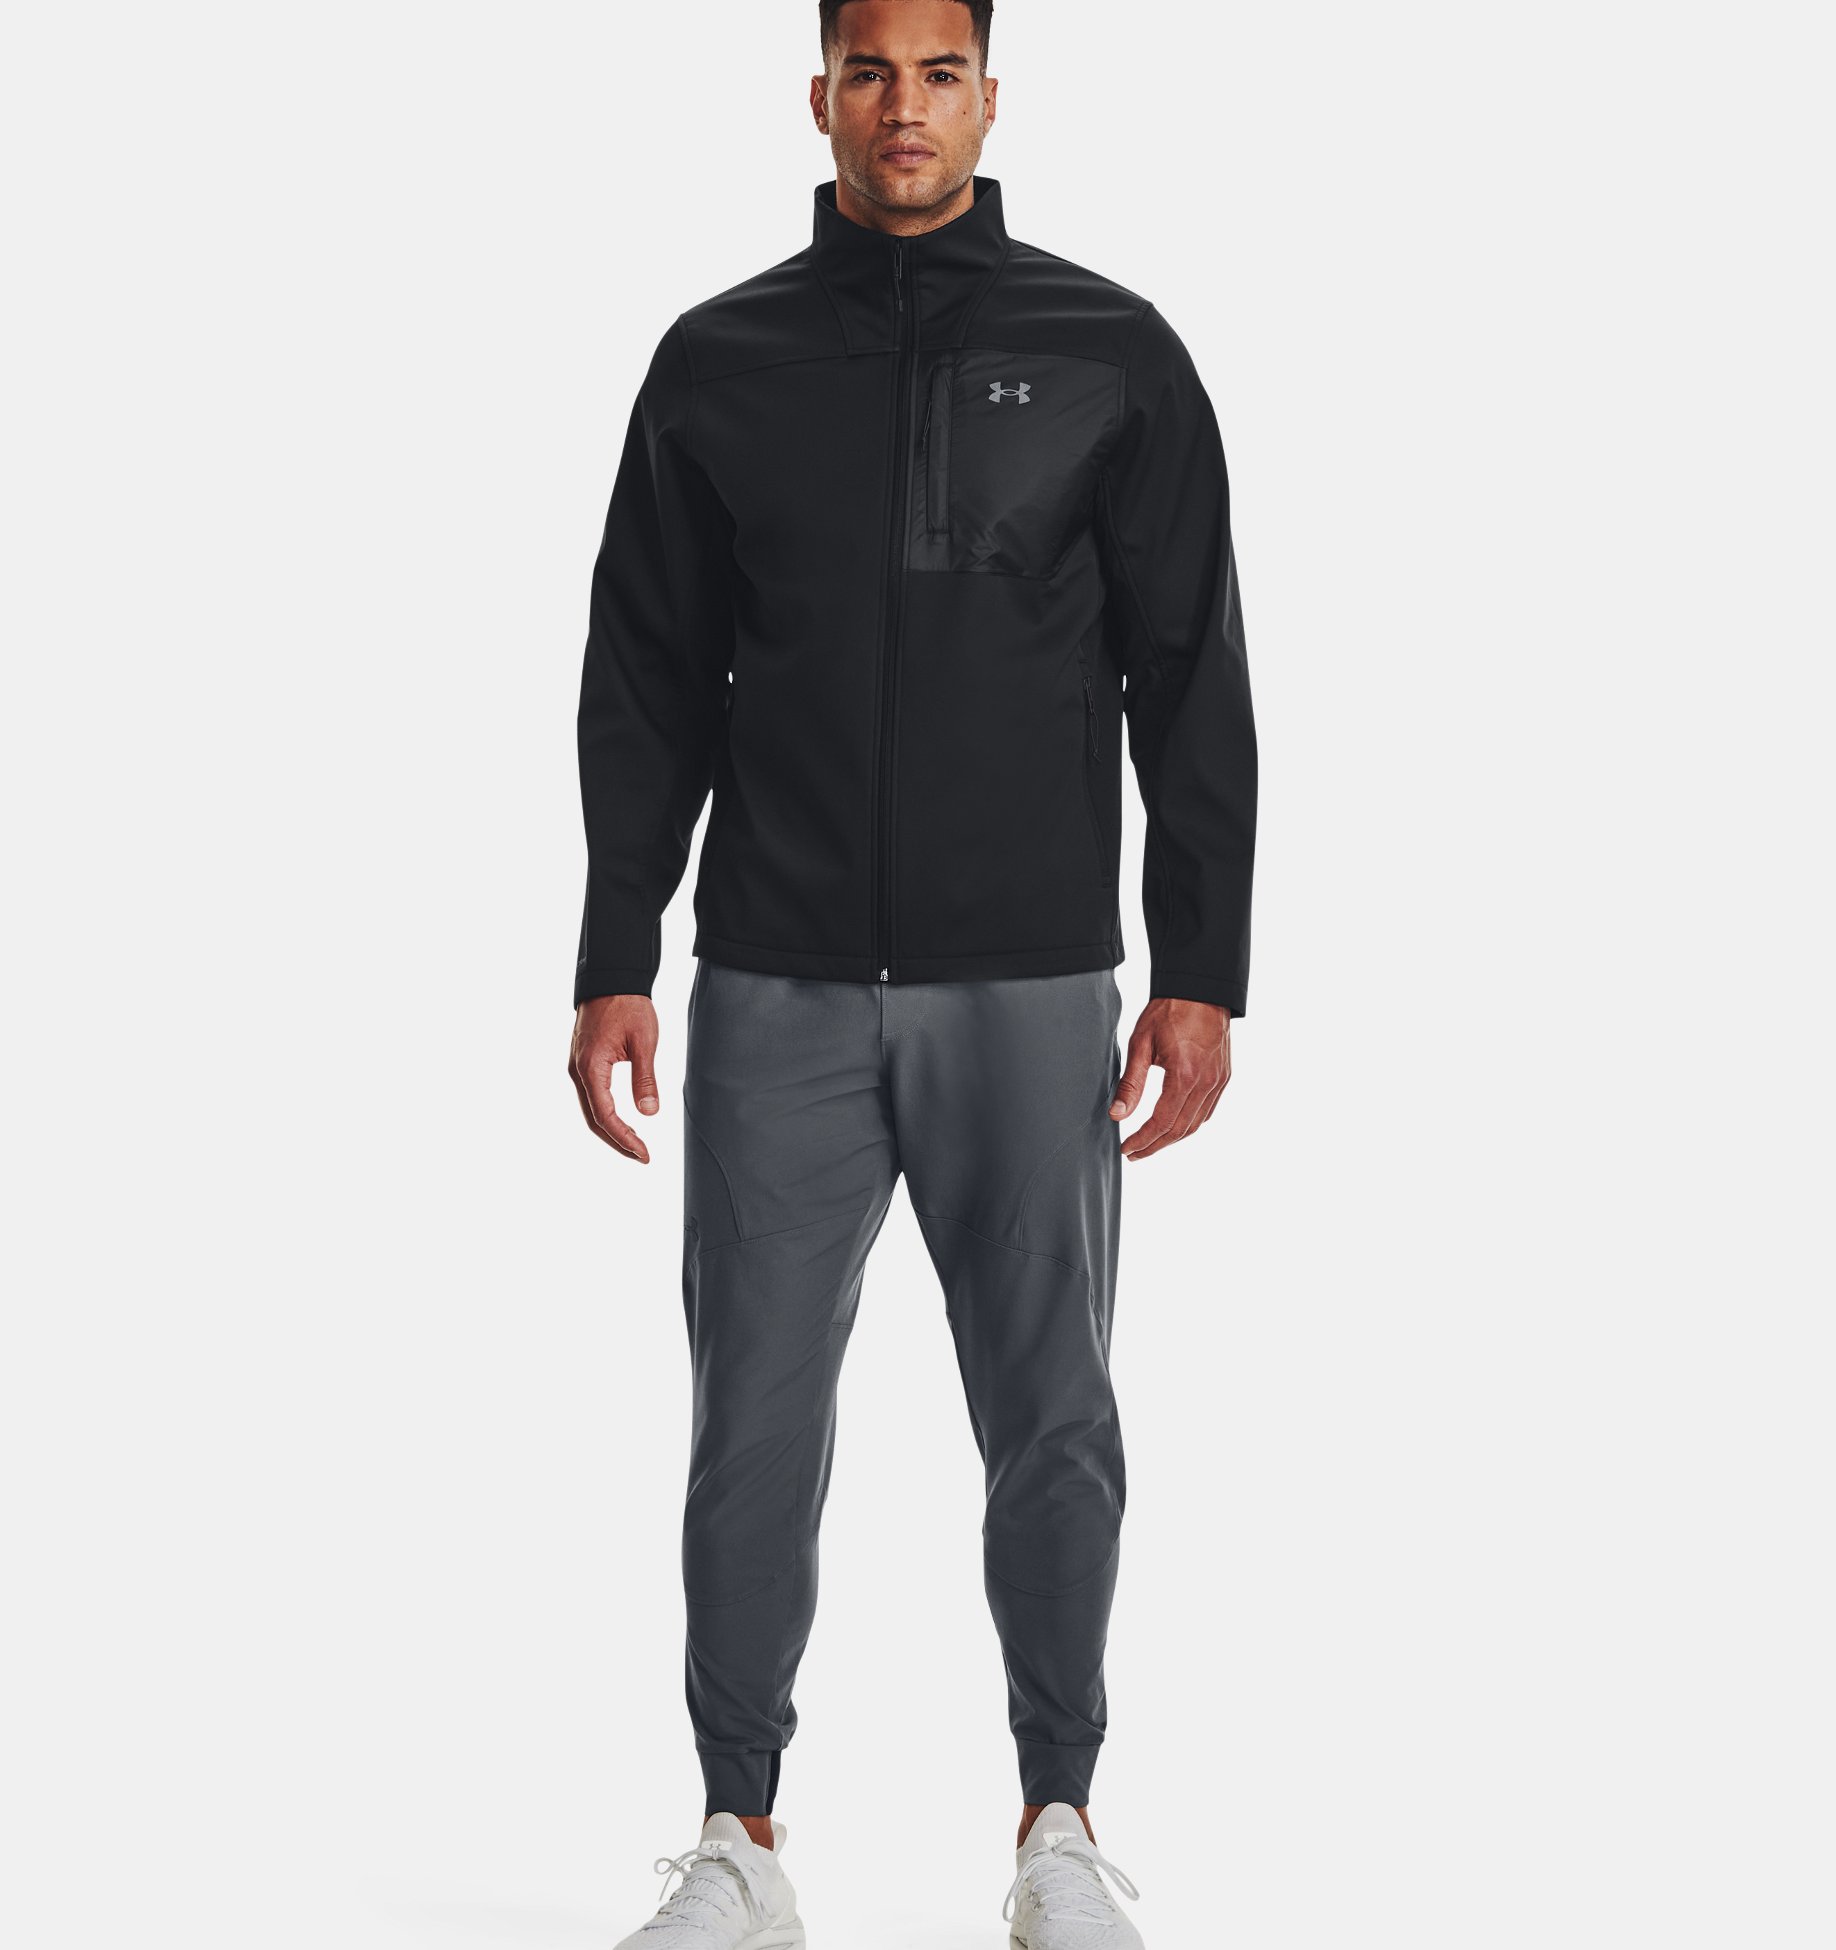 https://underarmour.scene7.com/is/image/Underarmour/V5-1371586-001_FSF?rp=standard-0pad|pdpZoomDesktop&scl=0.72&fmt=jpg&qlt=85&resMode=sharp2&cache=on,on&bgc=f0f0f0&wid=1836&hei=1950&size=1500,1500